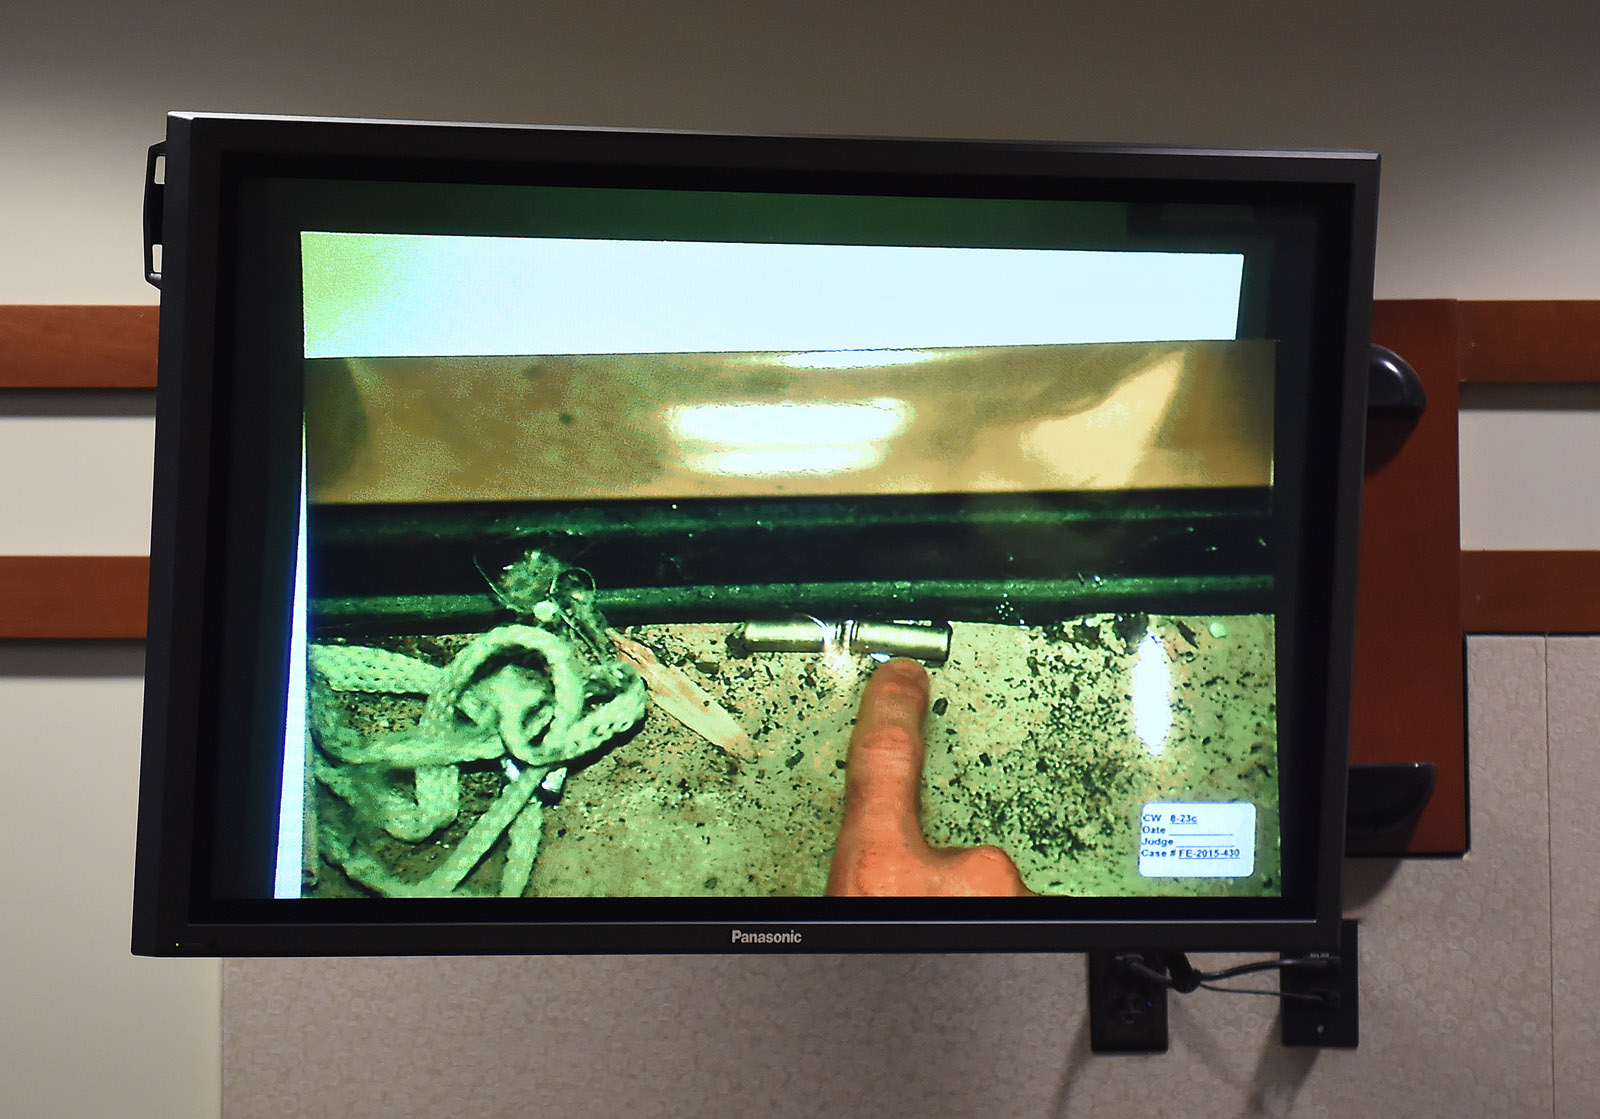 A photo of shell casings that were obtained during a search are displayed during the Charles Severance trial in Fairfax County Circuit Court on Tuesday October 13, 2015 in Fairfax, VA. Severance is accused of three murders over the course of a decade in Alexandria, VA. (Pool Photo by Matt McClain/ The Washington Post)